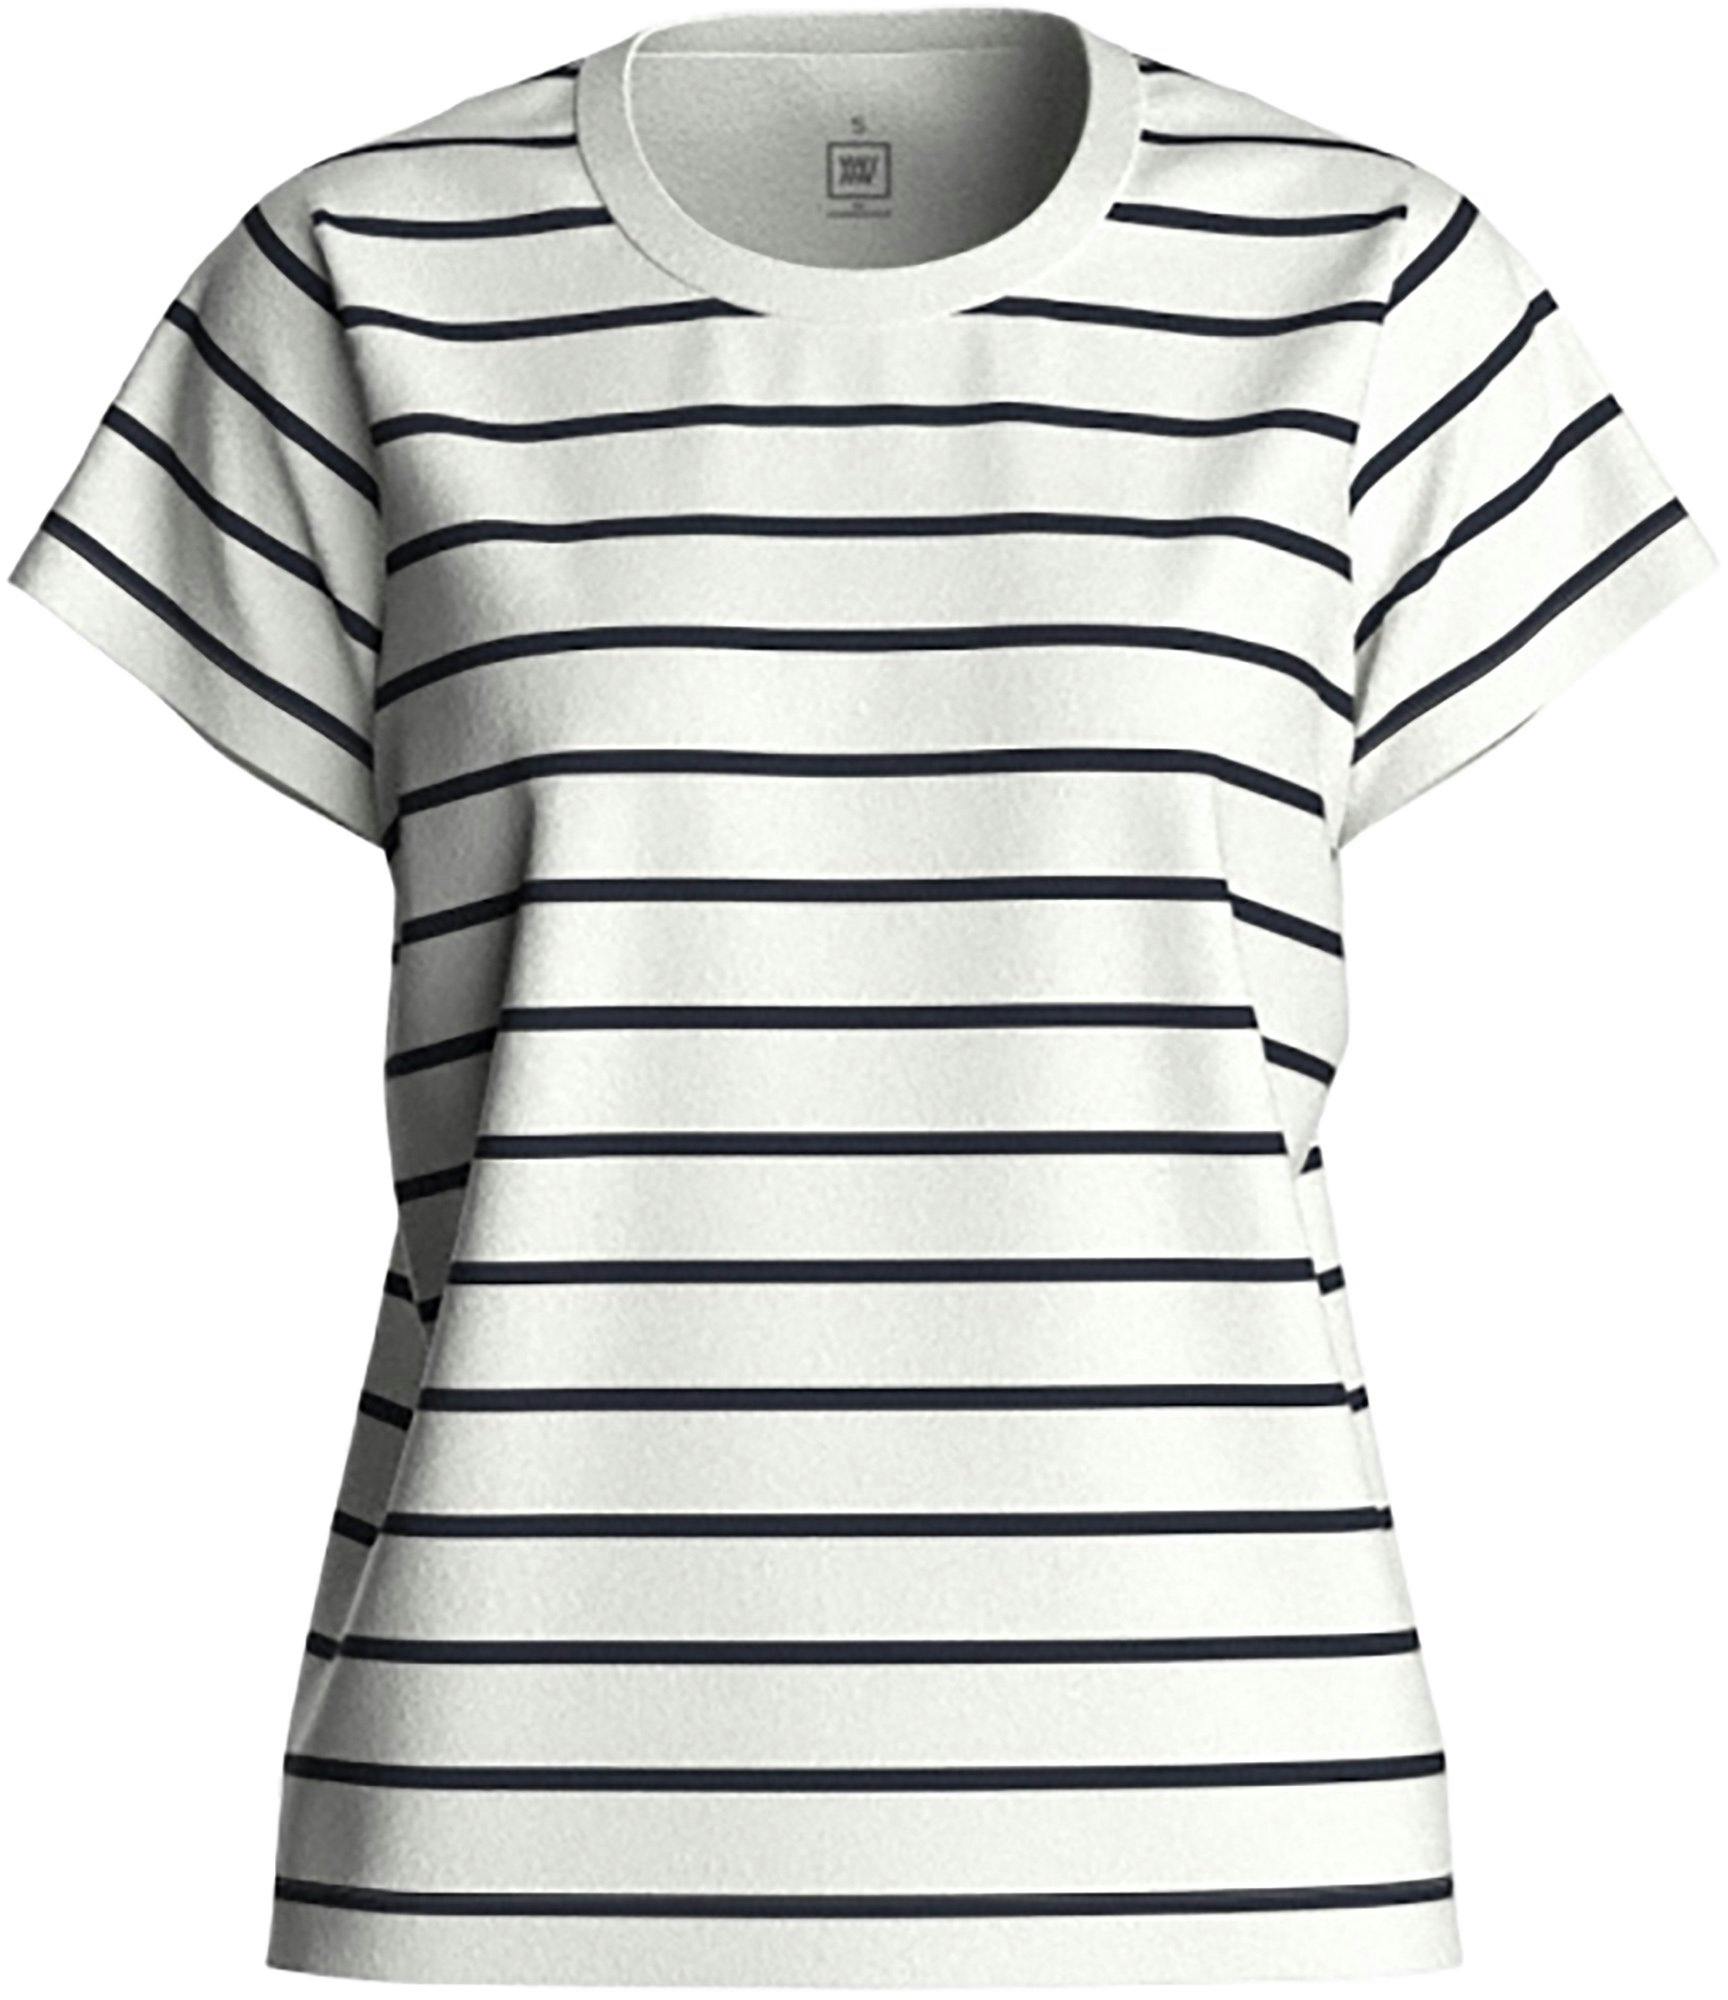 Product image for Kragero Tee - Women's